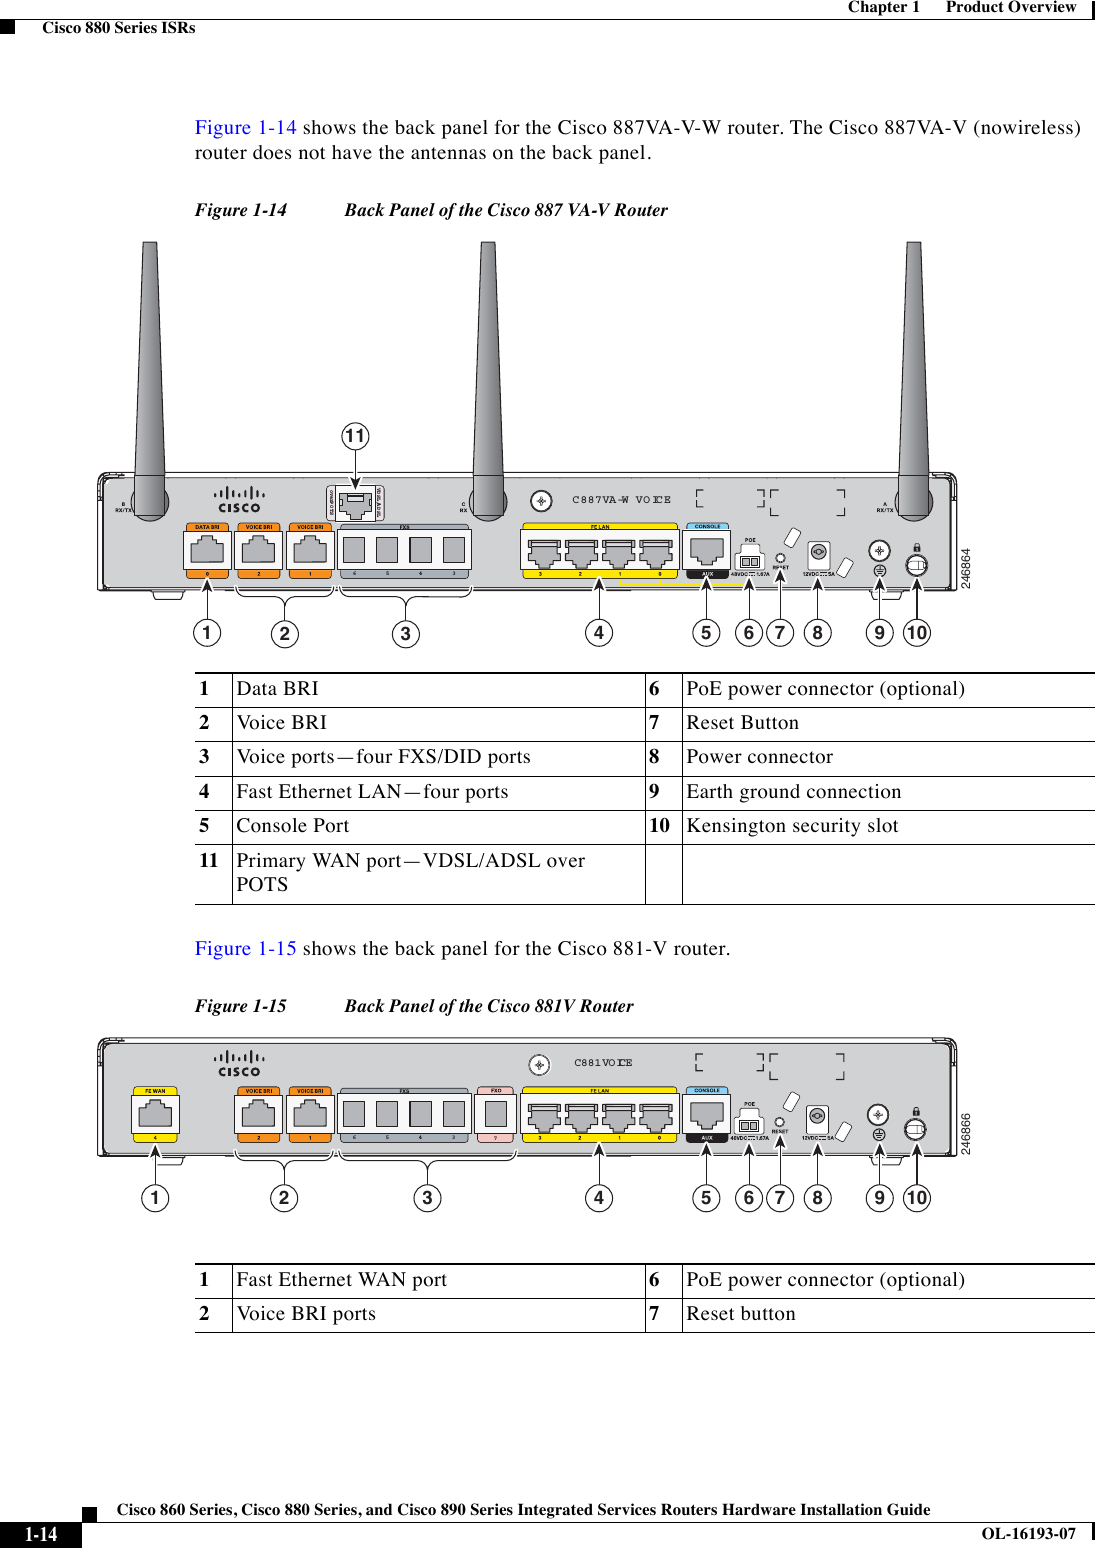  1-14Cisco 860 Series, Cisco 880 Series, and Cisco 890 Series Integrated Services Routers Hardware Installation GuideOL-16193-07Chapter 1      Product Overview  Cisco 880 Series ISRsFigure 1-14 shows the back panel for the Cisco 887VA-V-W router. The Cisco 887VA-V (nowireless) router does not have the antennas on the back panel.Figure 1-14 Back Panel of the Cisco 887 VA-V RouterFigure 1-15 shows the back panel for the Cisco 881-V router. Figure 1-15 Back Panel of the Cisco 881V Router1Data BRI 6PoE power connector (optional) 2Voice BRI 7Reset Button3Voice ports—four FXS/DID ports 8Power connector4Fast Ethernet LAN—four ports 9  Earth ground connection5Console Port 10 Kensington security slot11 Primary WAN port—VDSL/ADSL over POTS246864overPO T SVDSL/ADSLC887VA-W  VO ICE34561 4 5 6 8 9 1073211246866C881  VO ICE3456 71 4 5 6 8 9 107321Fast Ethernet WAN port 6PoE power connector (optional)2Voice BRI ports 7Reset button